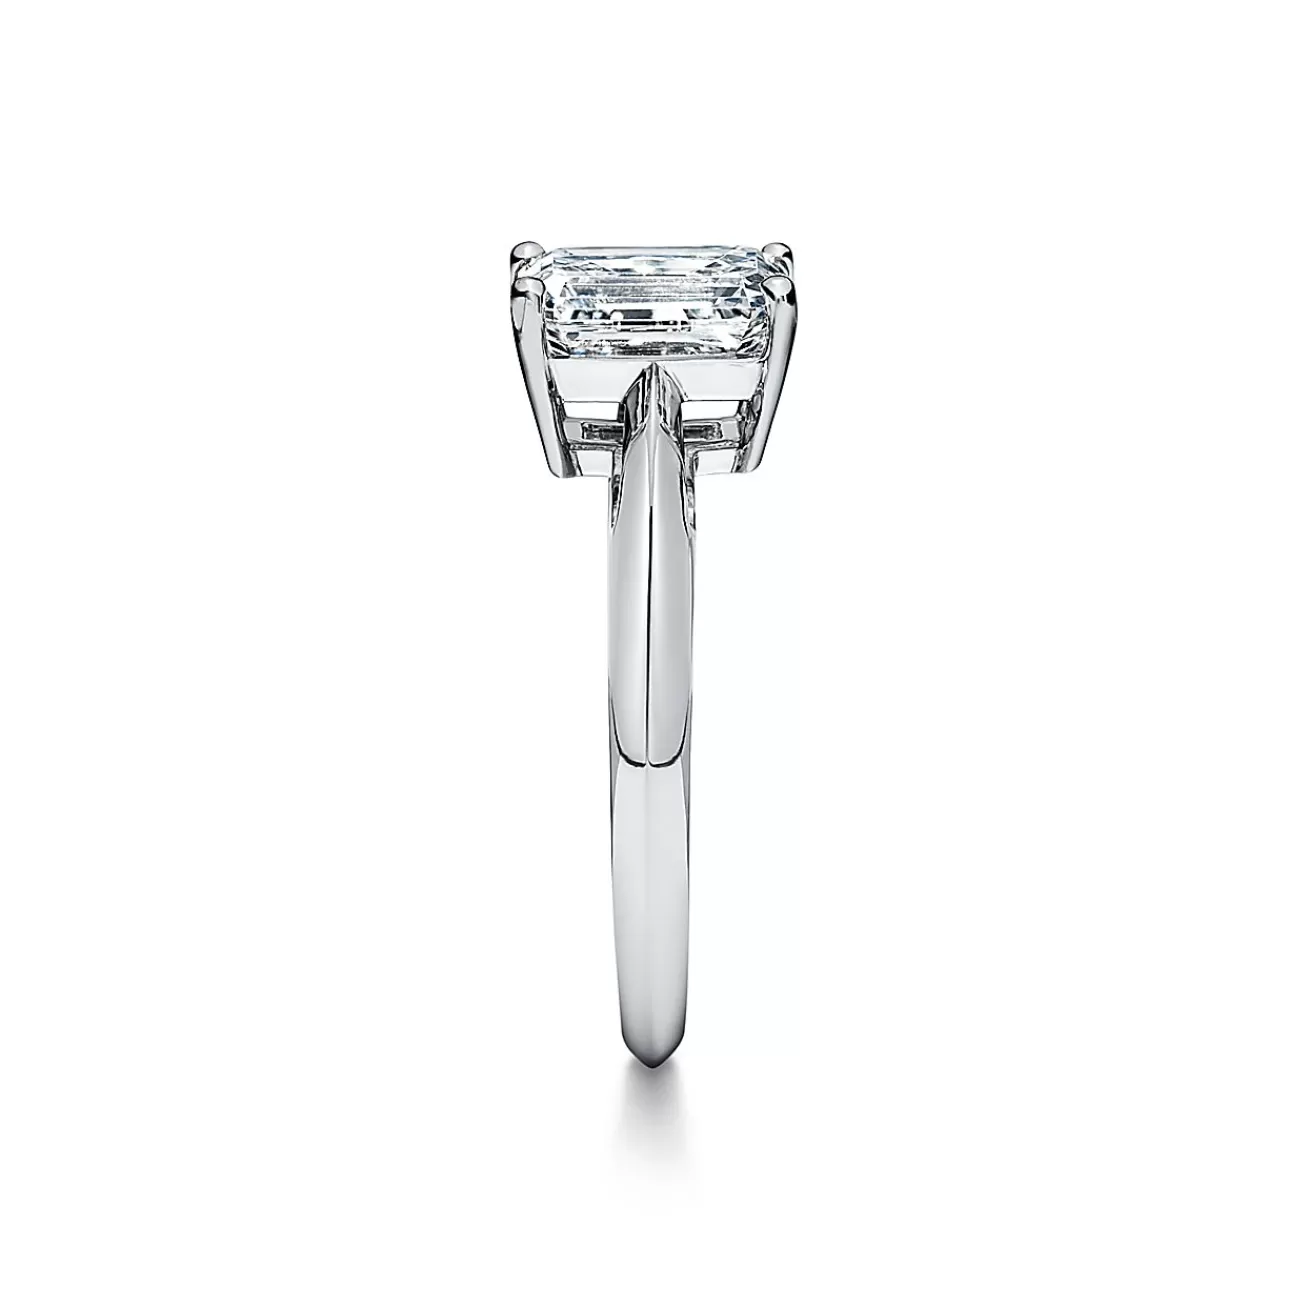 Tiffany & Co. Emerald-cut diamond engagement ring in platinum. | ^ Engagement Rings